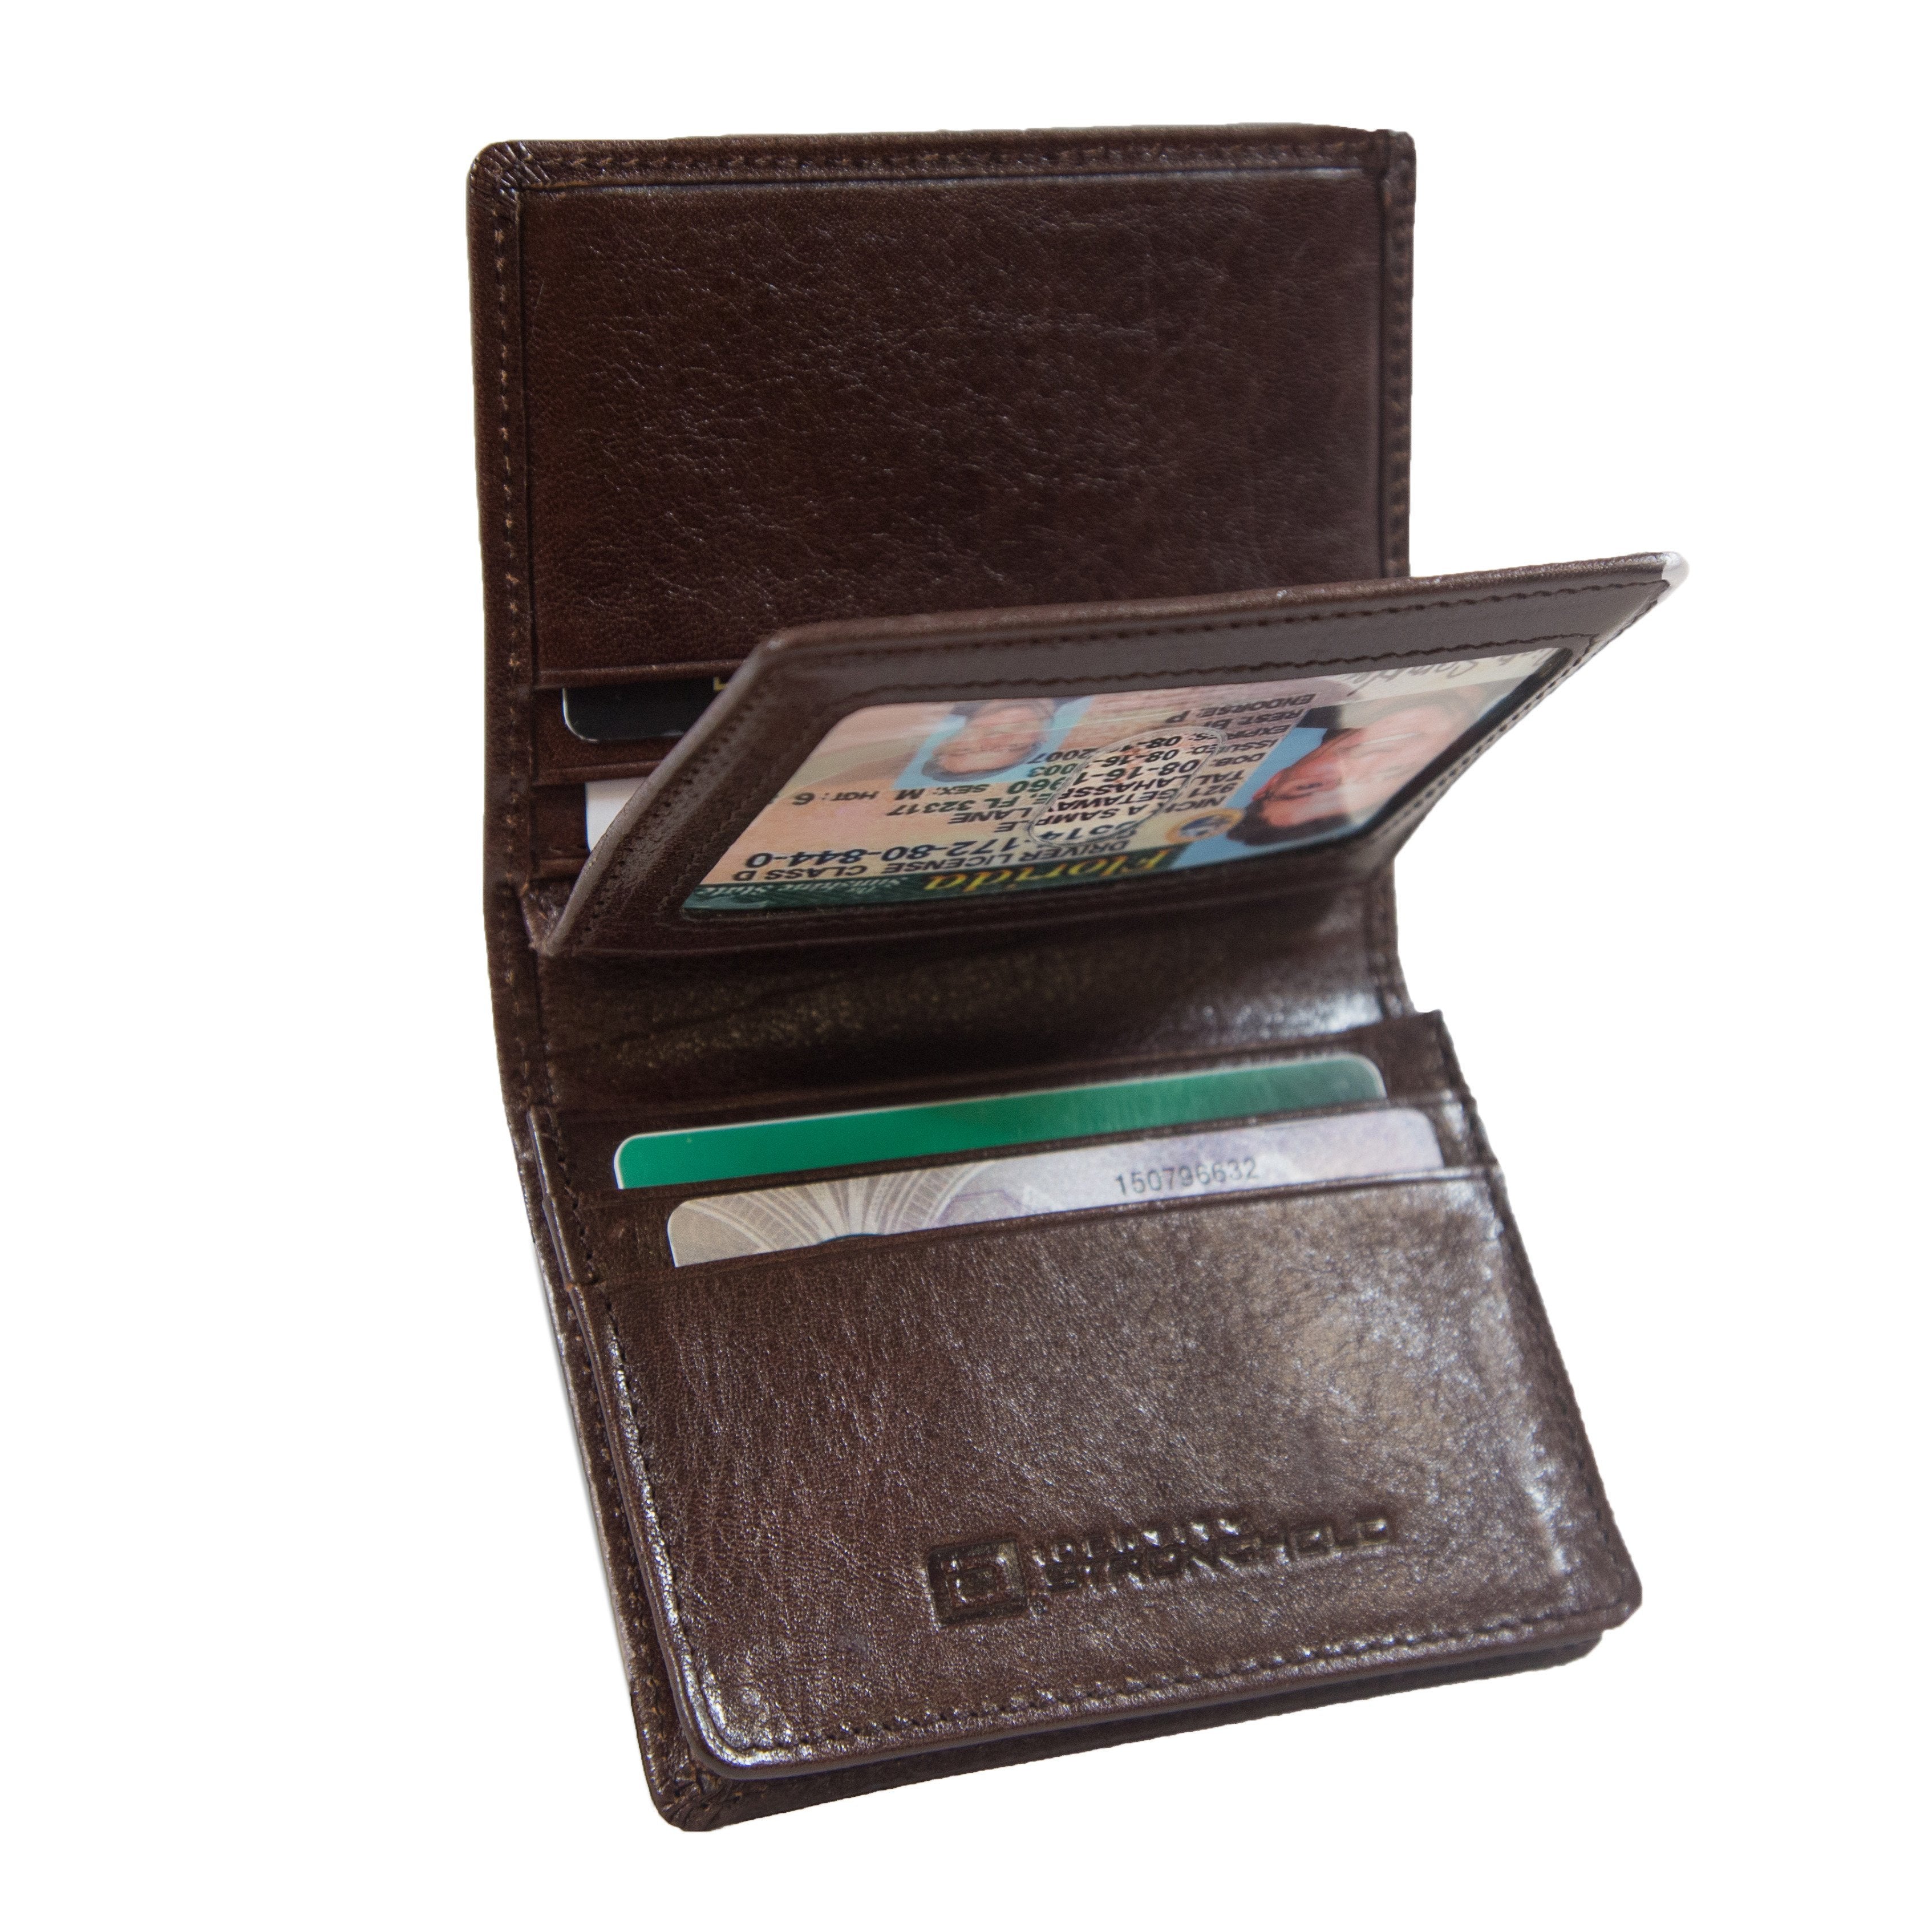 Robinson Card Case: Women's Wallets & Card Cases, Card Cases